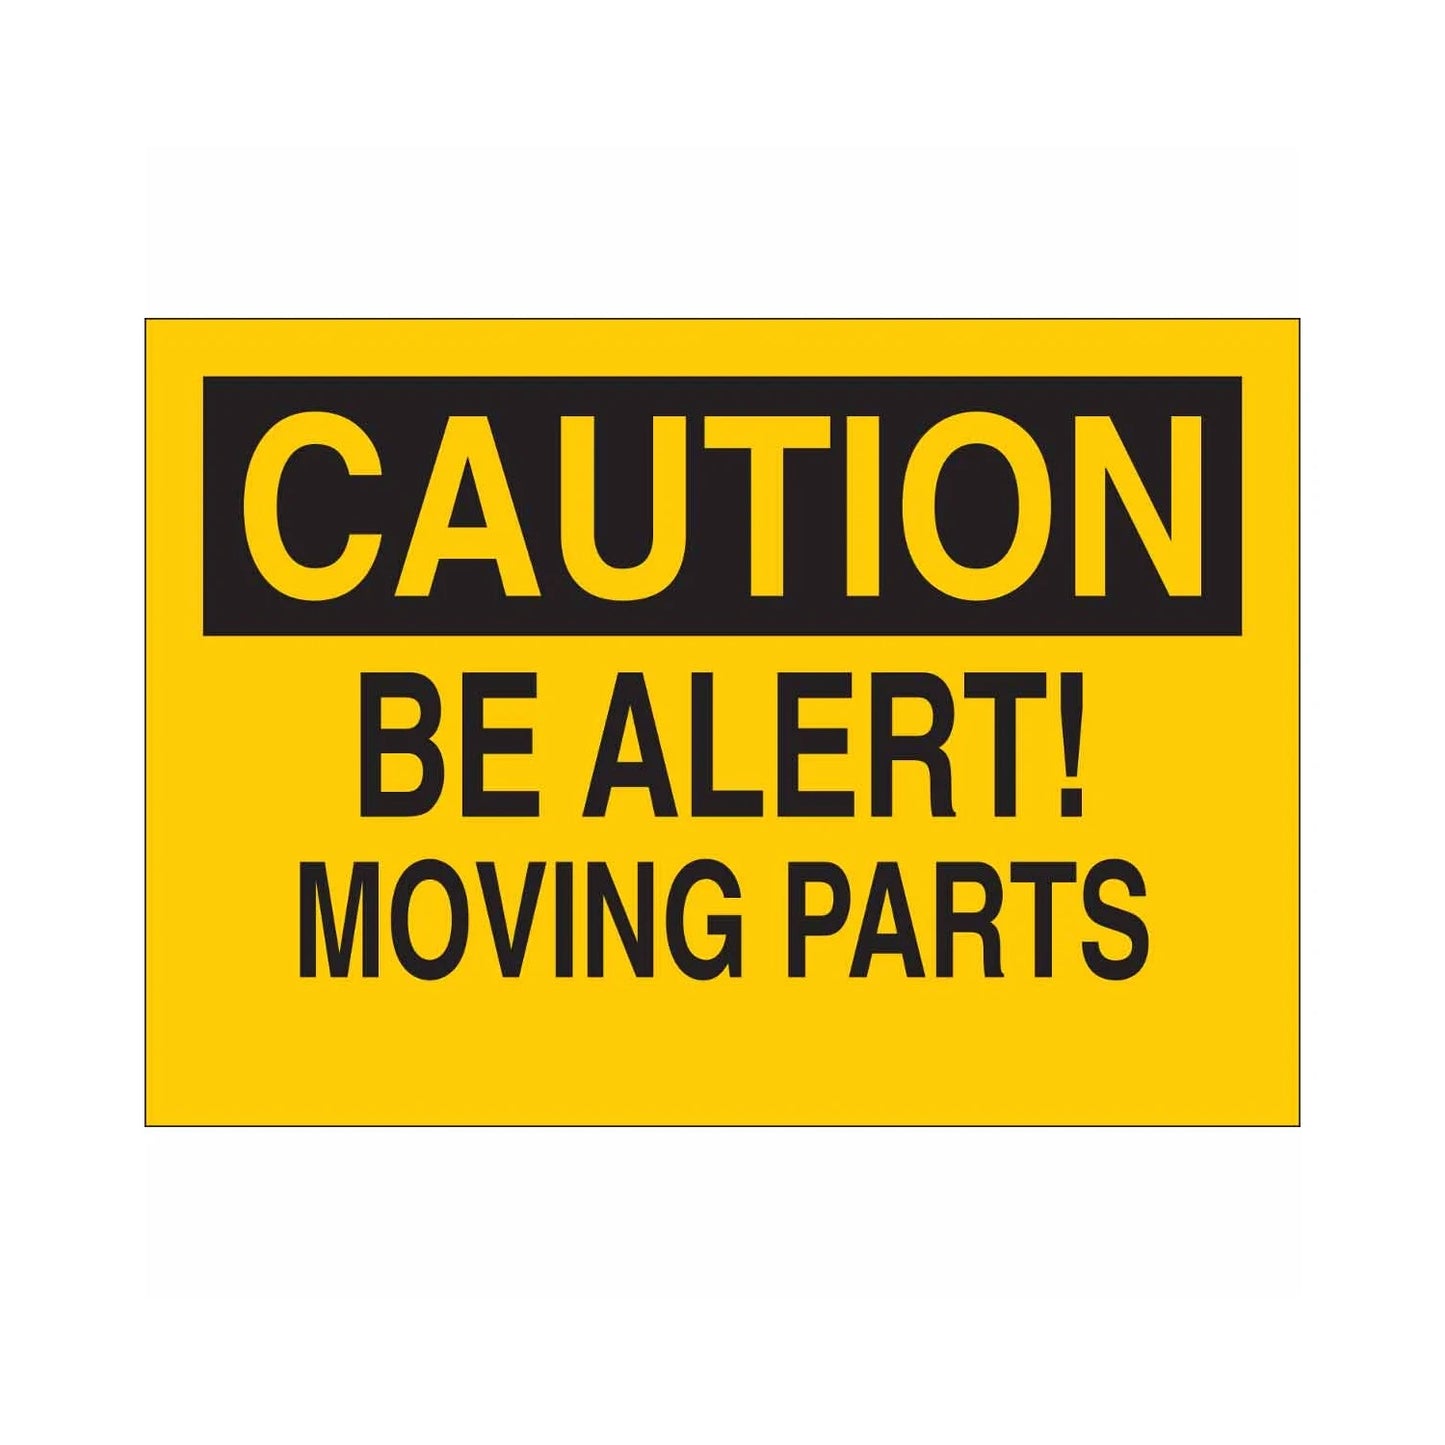 CAUTION Be Alert Moving Parts Sign